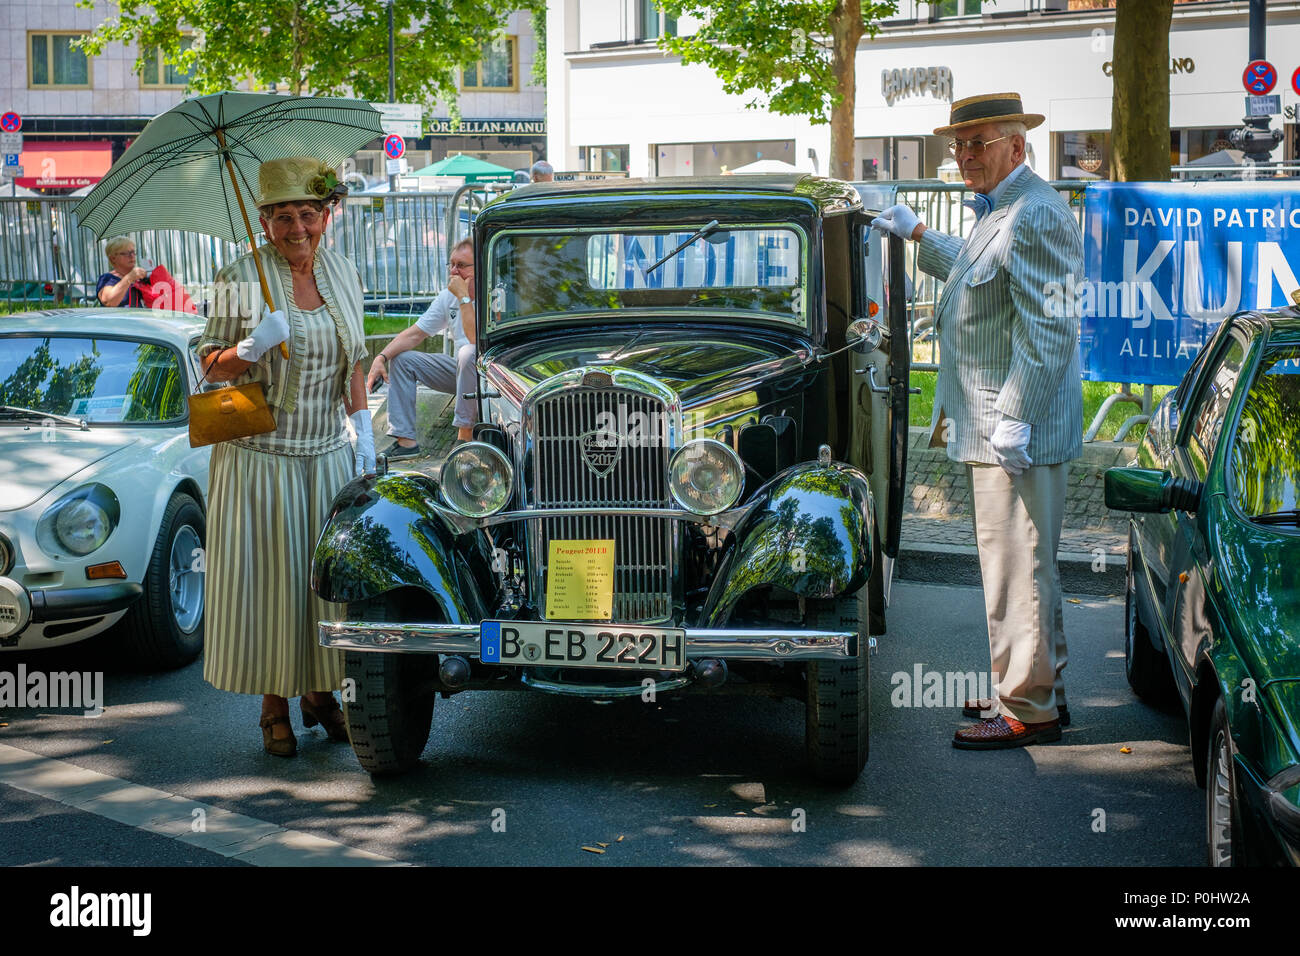 Berlin, Germany - june 09, 2018: Old Peugeot and older couple at Classic Days, a Oldtimer automobile exhibition showing vintage cars and historic vehicles at Kurfuerstendamm / Kudamm in Berlin Credit: hanohiki/Alamy Live News Stock Photo